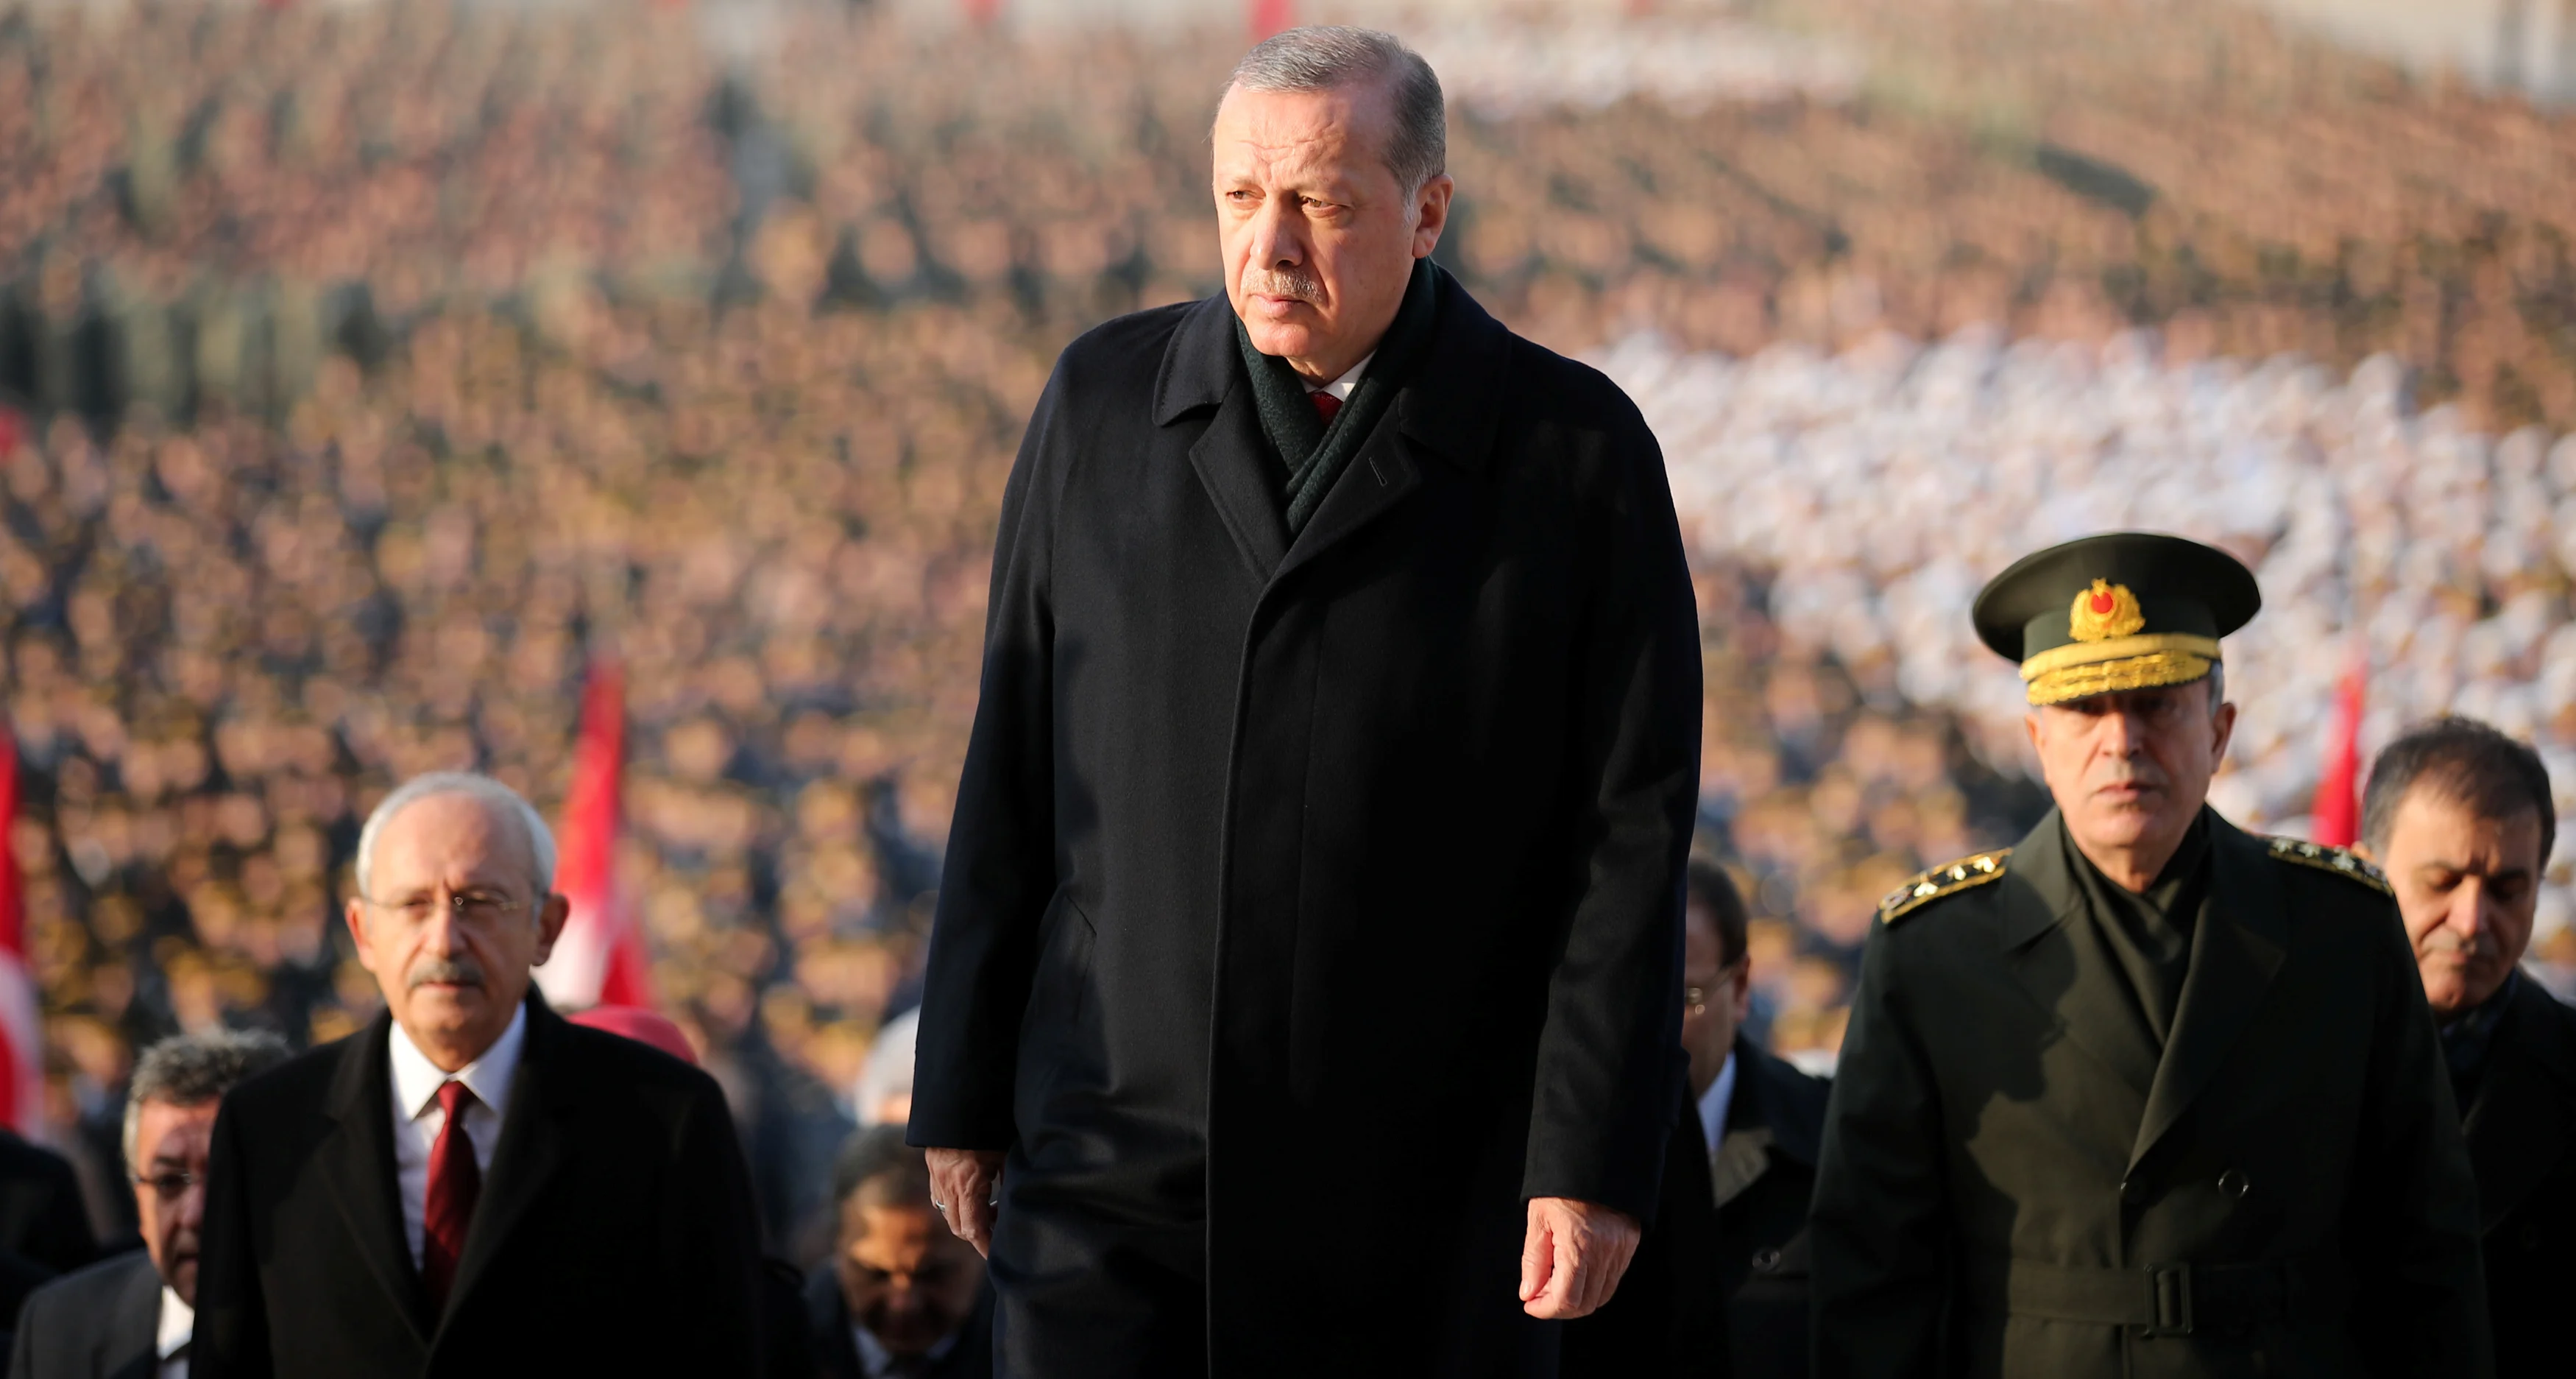 Turkish President Tayyip Erdogan Attends A Ceremony As He Is Flanked By Top Officials And Army Officers At The Mausoleum Of Mustafa Kemal Ataturk In Ankara